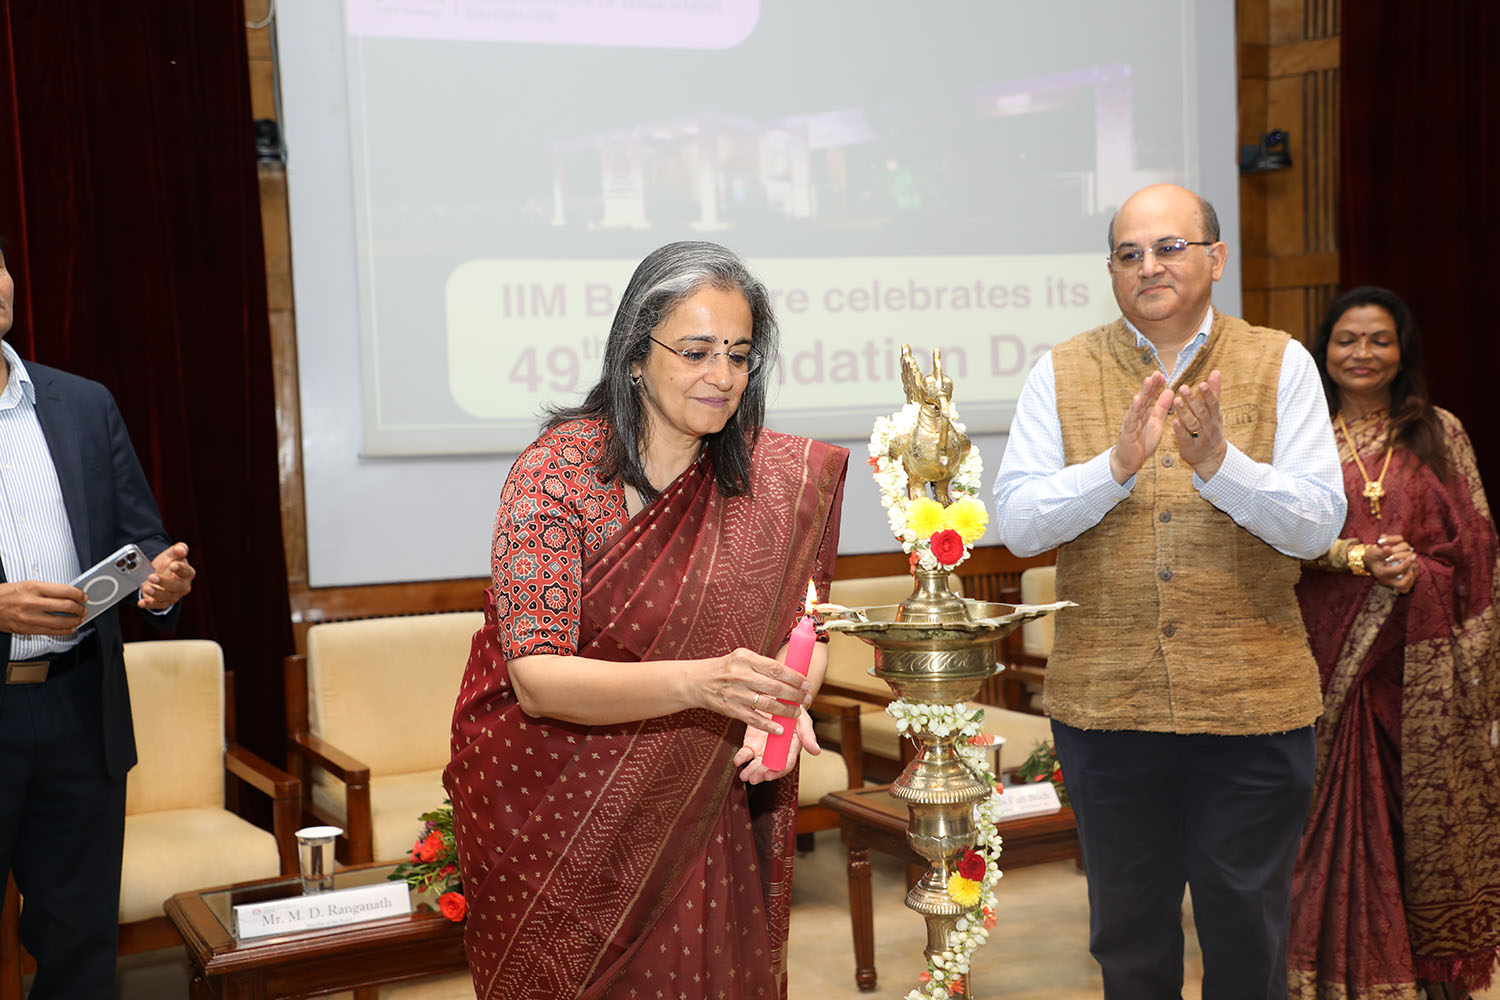 Ms Madhabi Puri-Buch, Chairperson, Securities and Exchange Board of India (SEBI), inaugurates the 49th Foundation Day celebrations, at IIMB, on October 28, 2022.